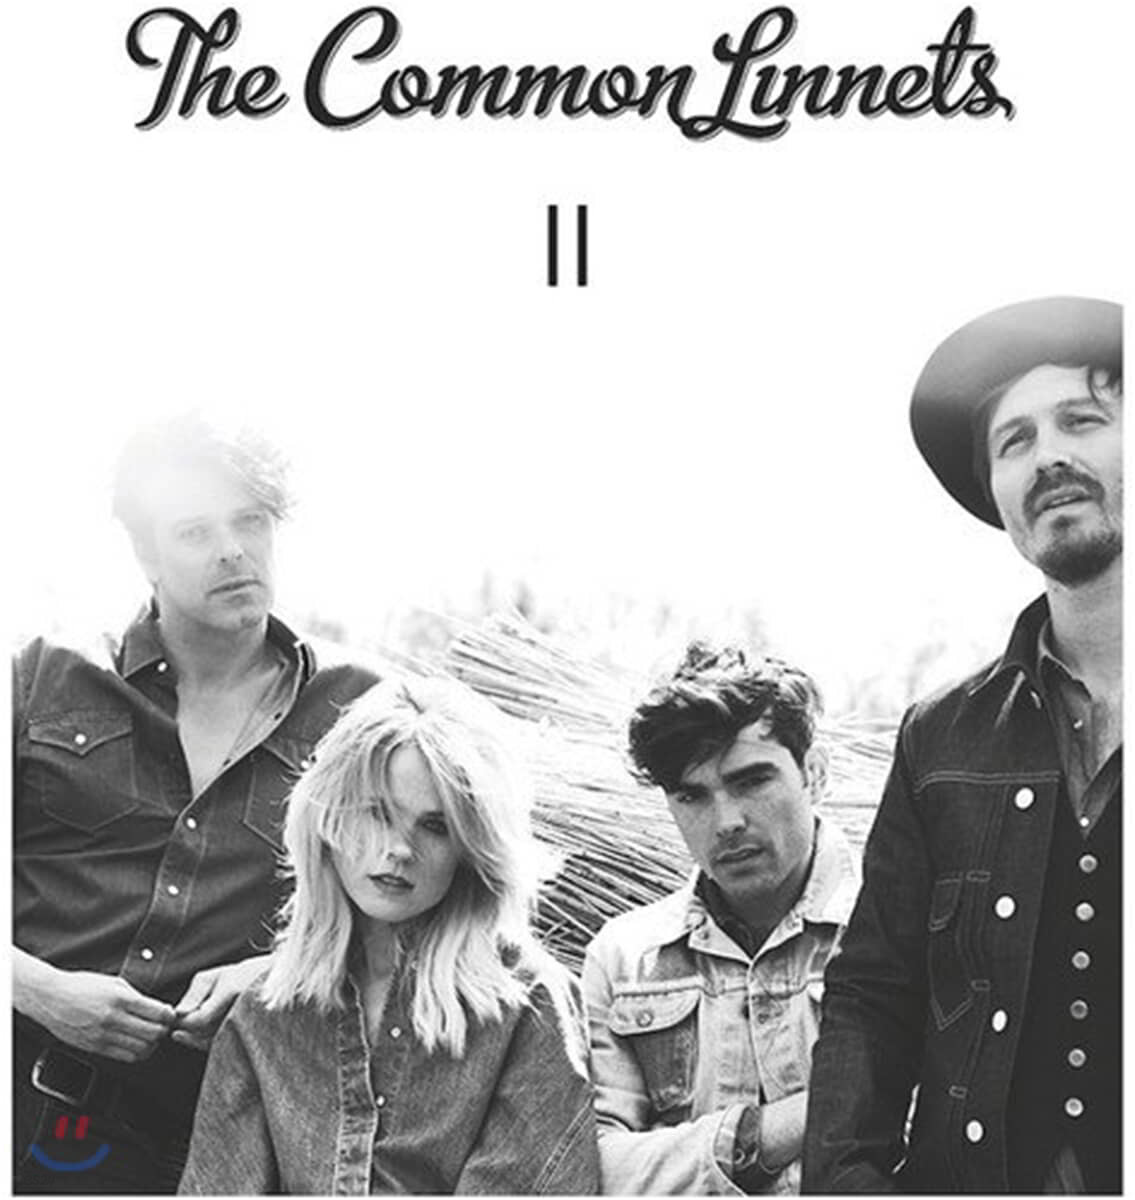 The Common Linnets (더 커먼 리넷츠) - Common Linnets [LP]